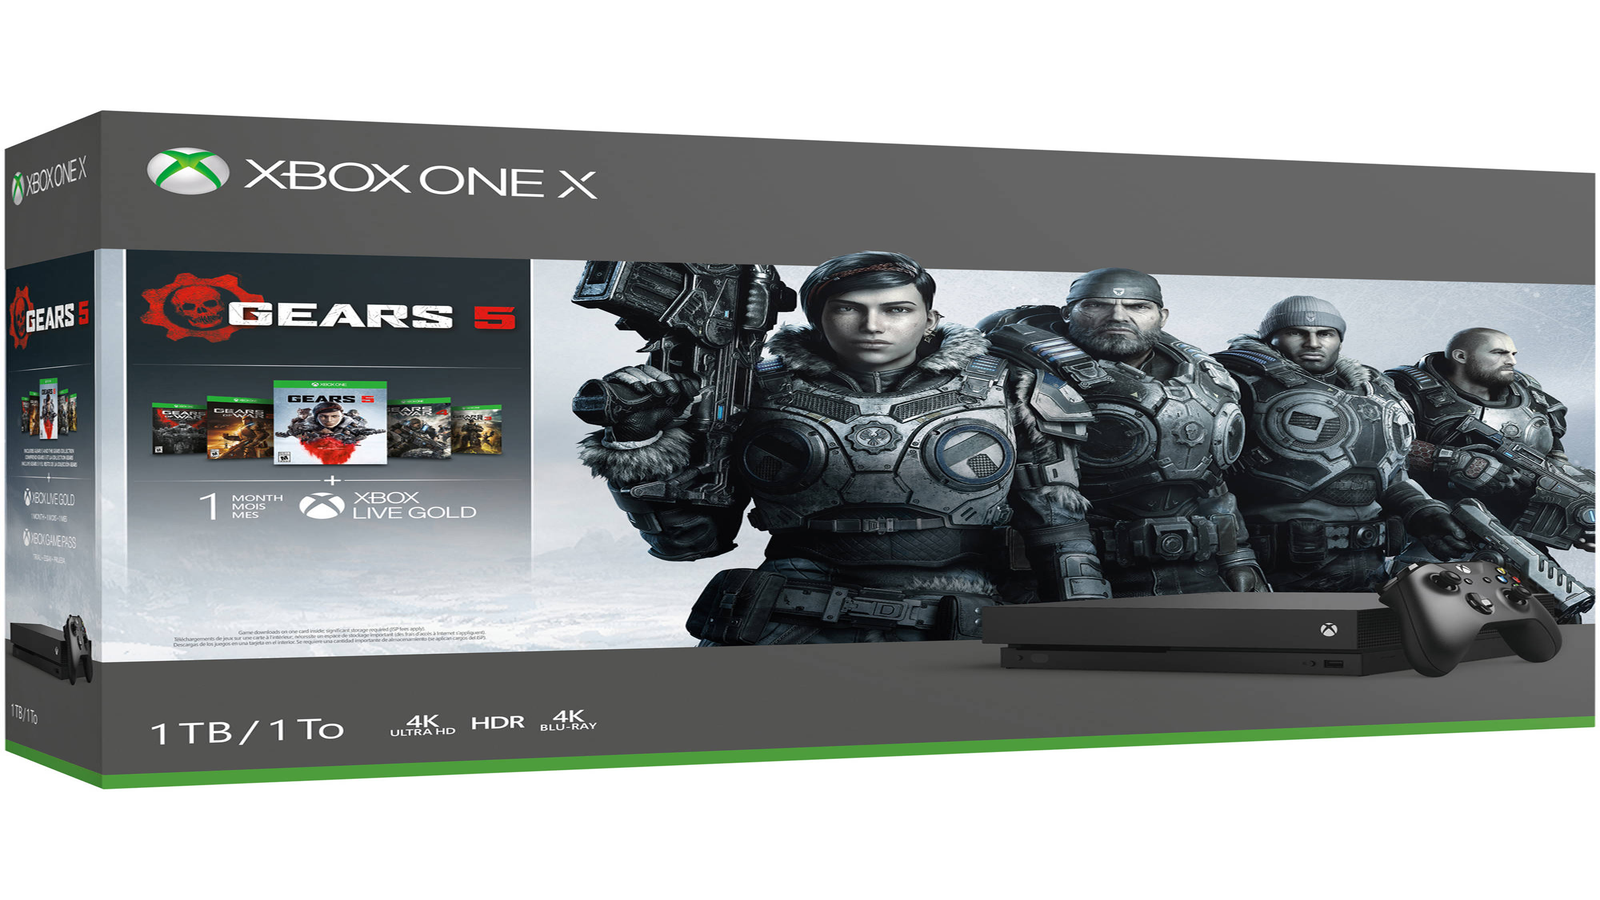 Buy Gears 5 Game of the Year Edition - Microsoft Store so-SO